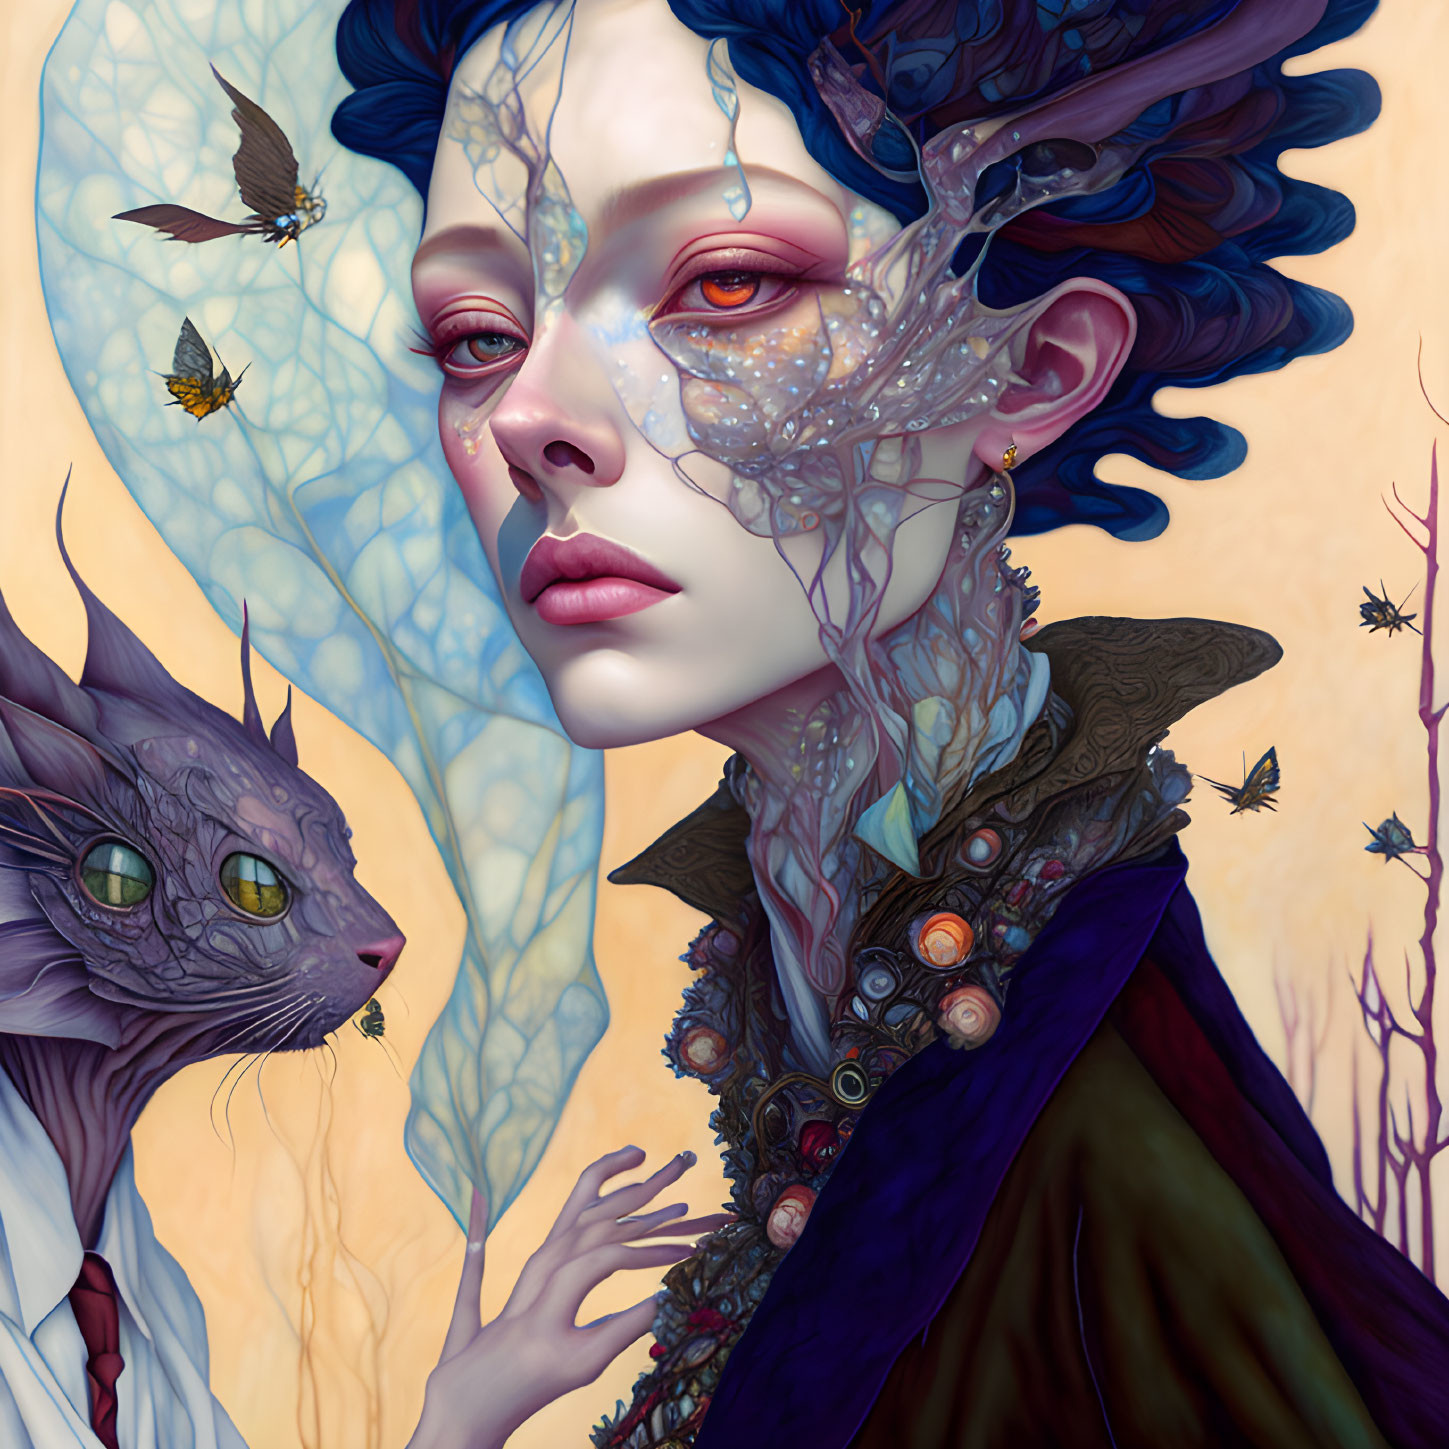 Fantastical digital artwork of woman with blue branch-like structures and cat with green eyes surrounded by butterflies